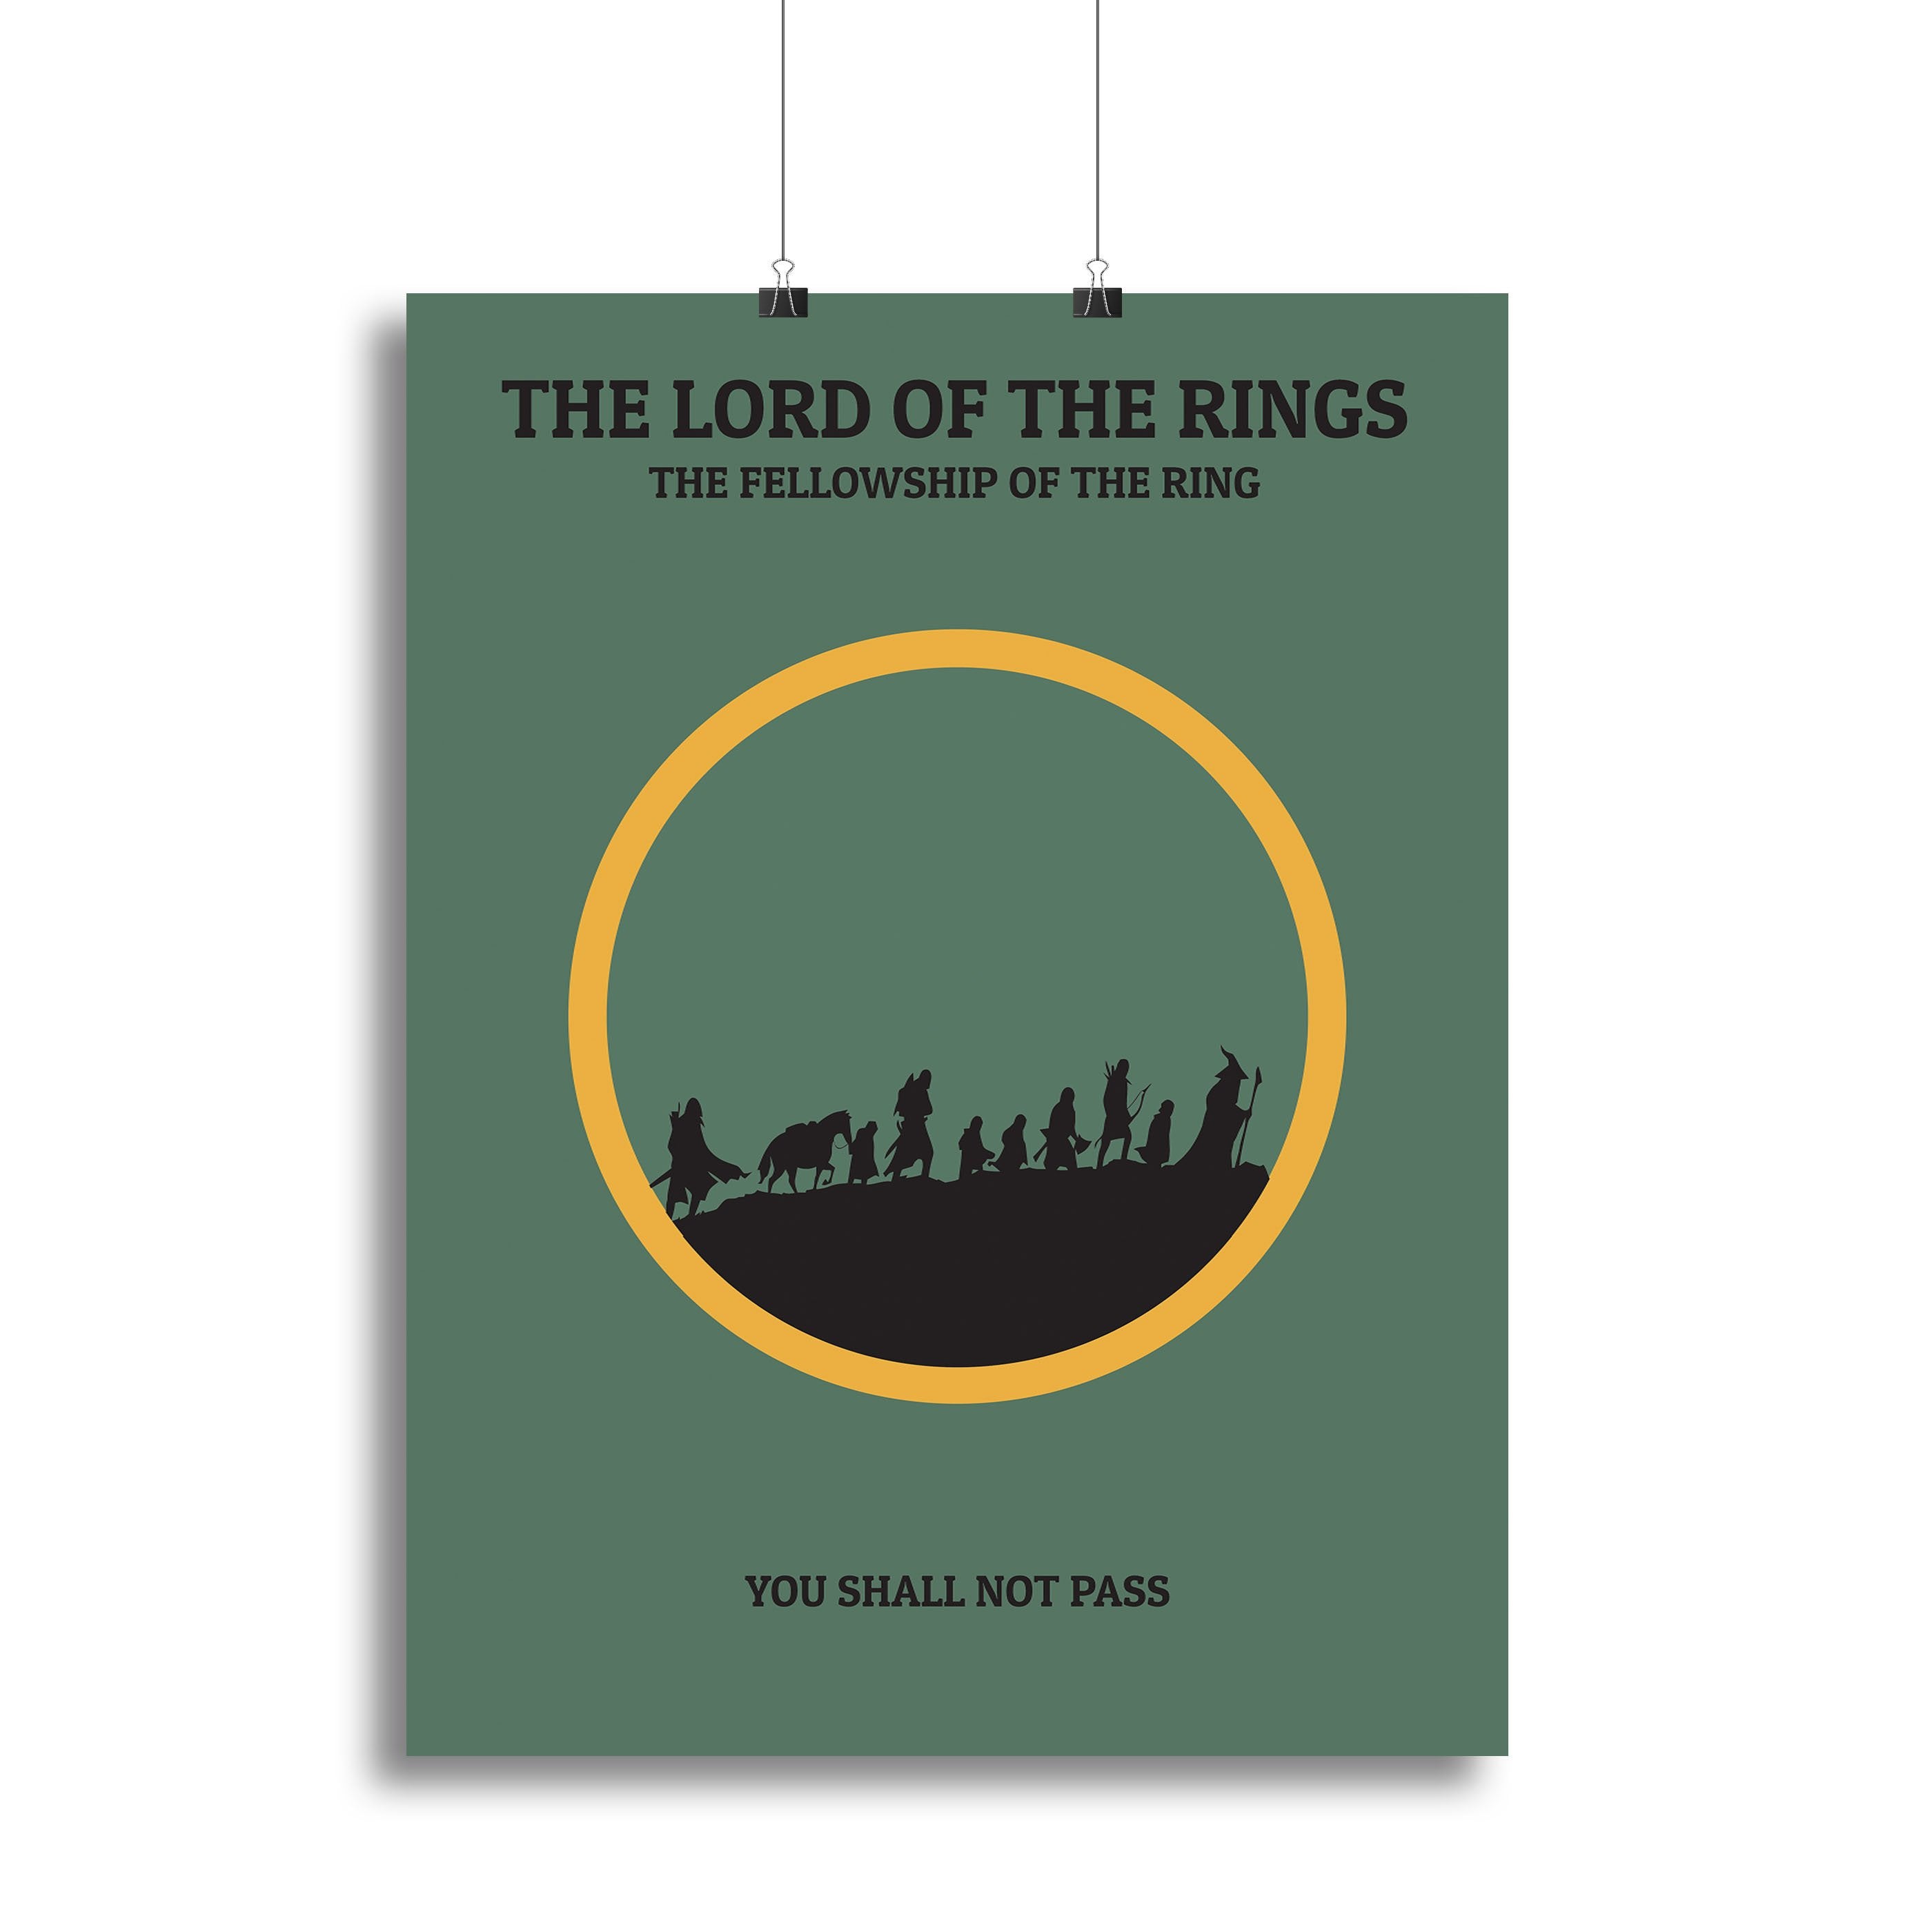 The Hobbit Trilogy Movie Poster Collection | Set of 3 | Lord of The Rings |  NEW | eBay